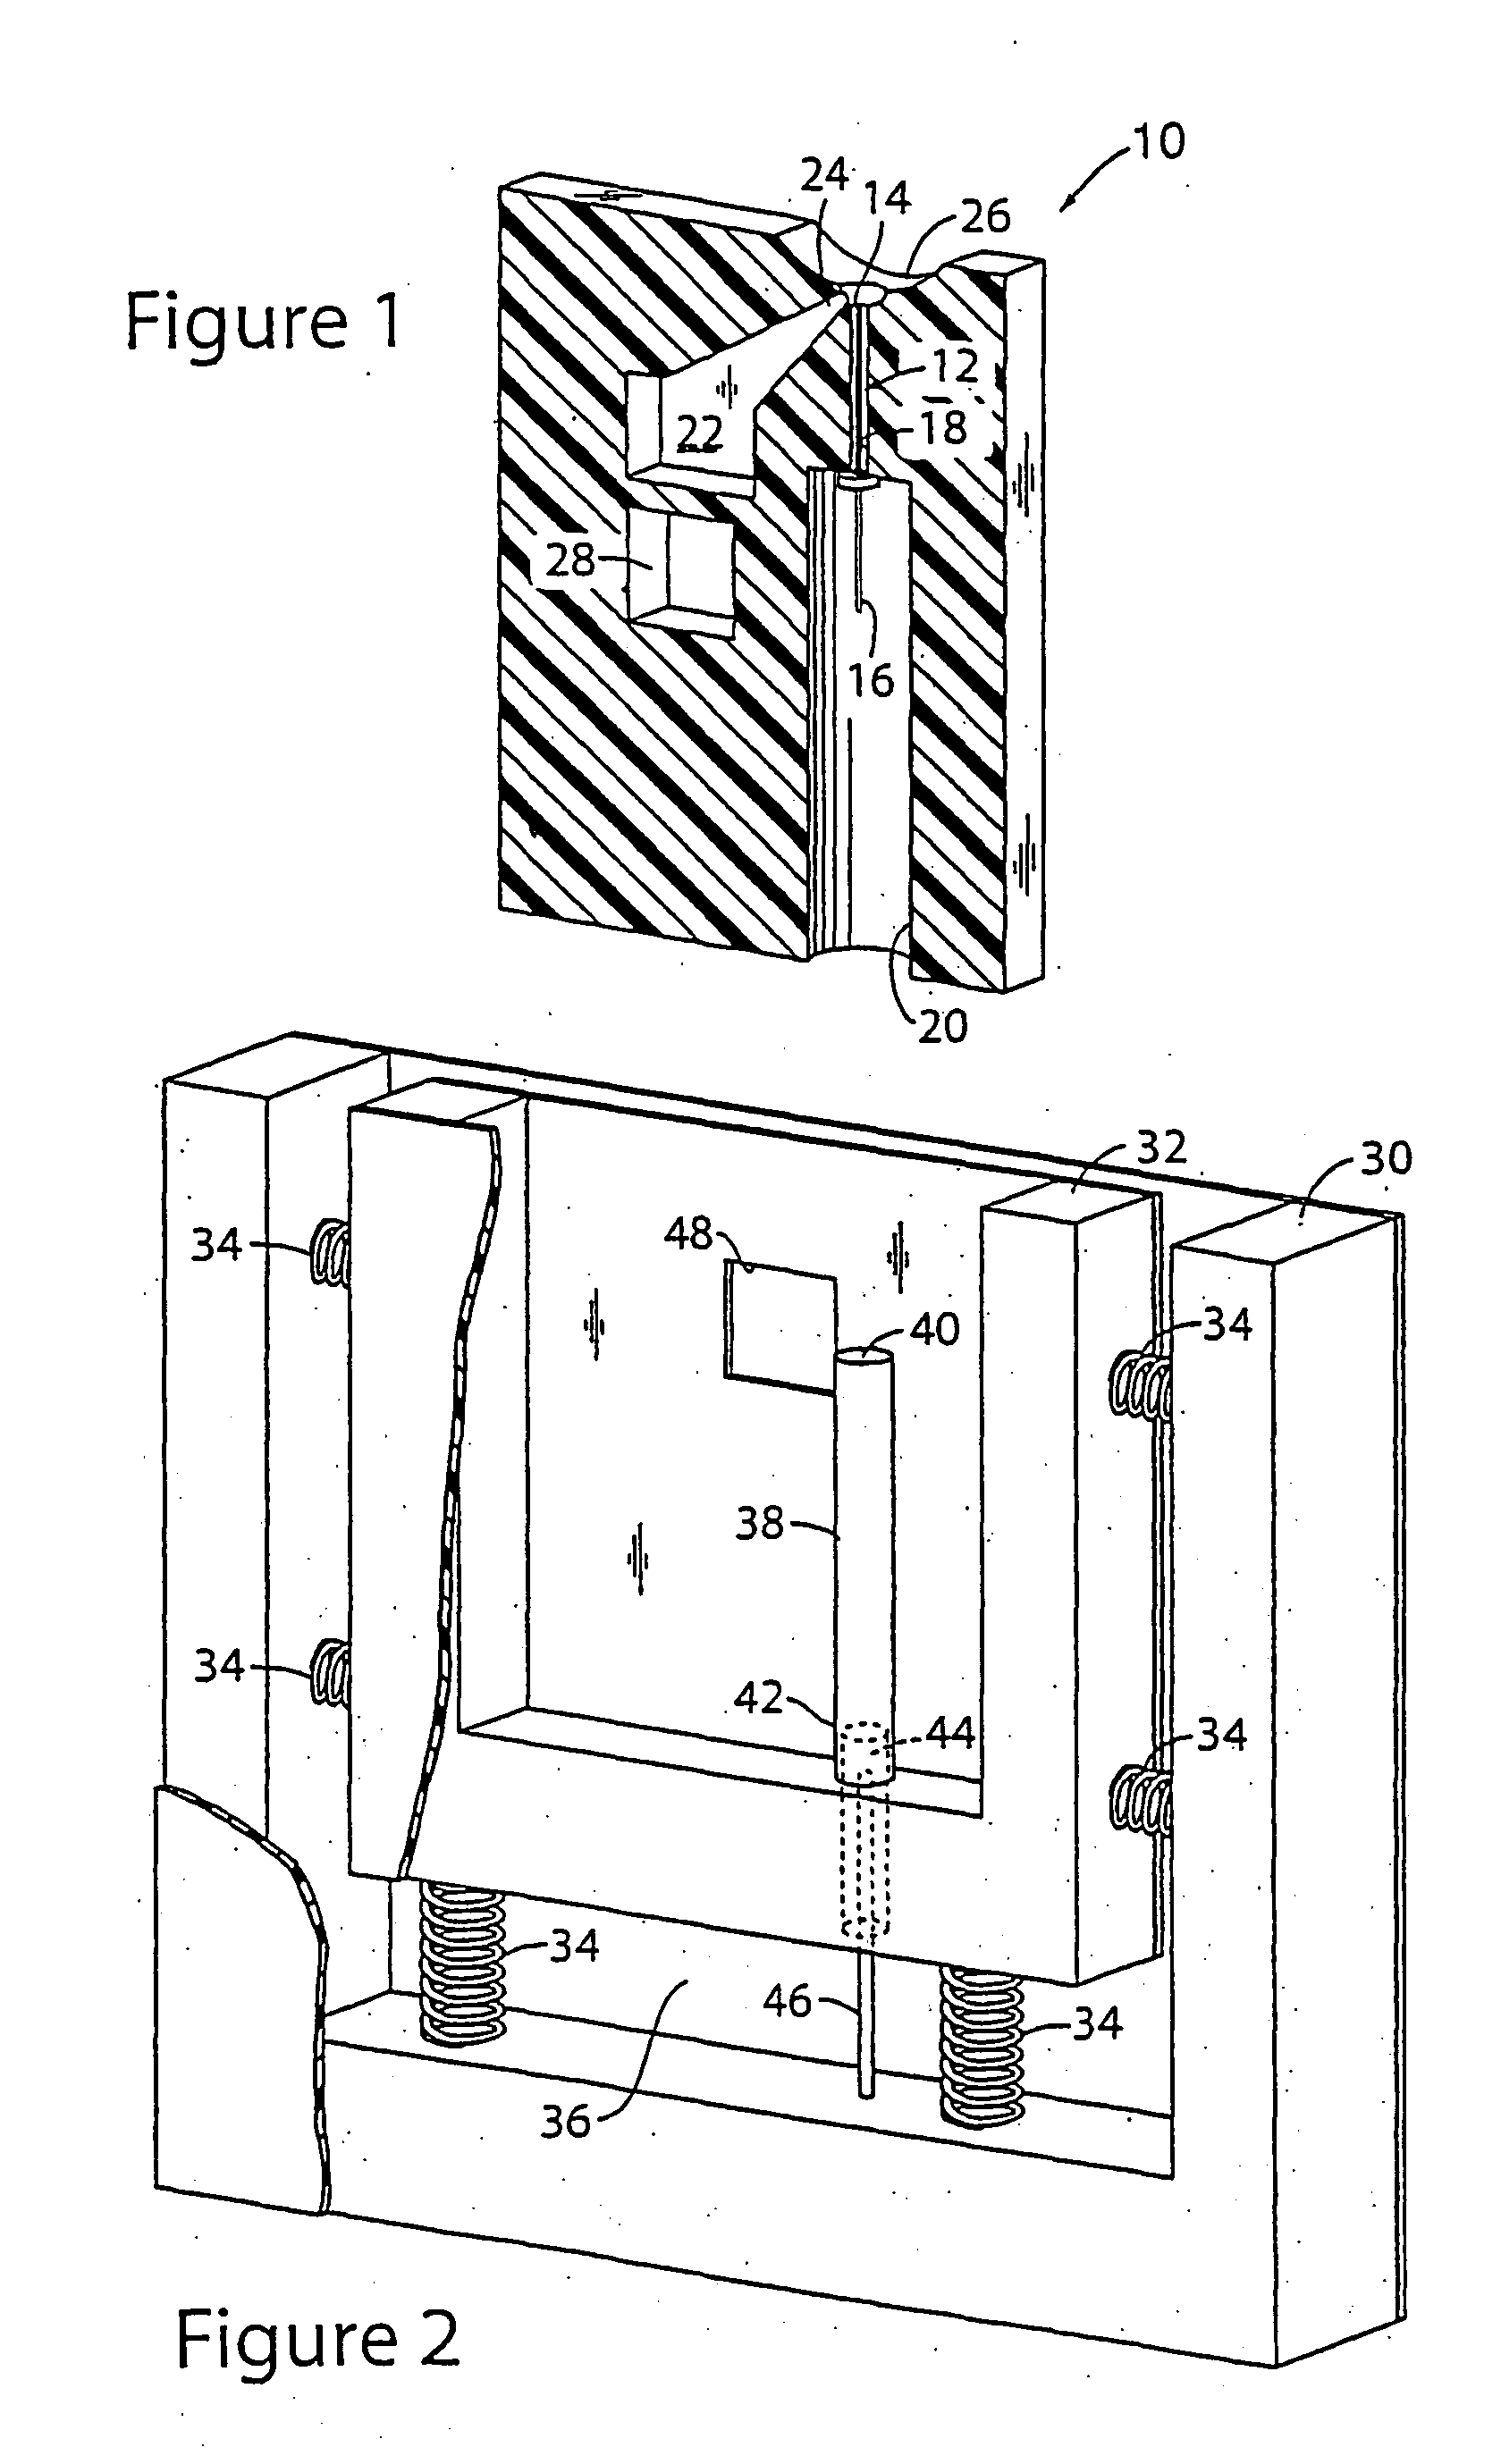 Method and apparatus for lancet launching device intergrated onto a blood-sampling cartridge